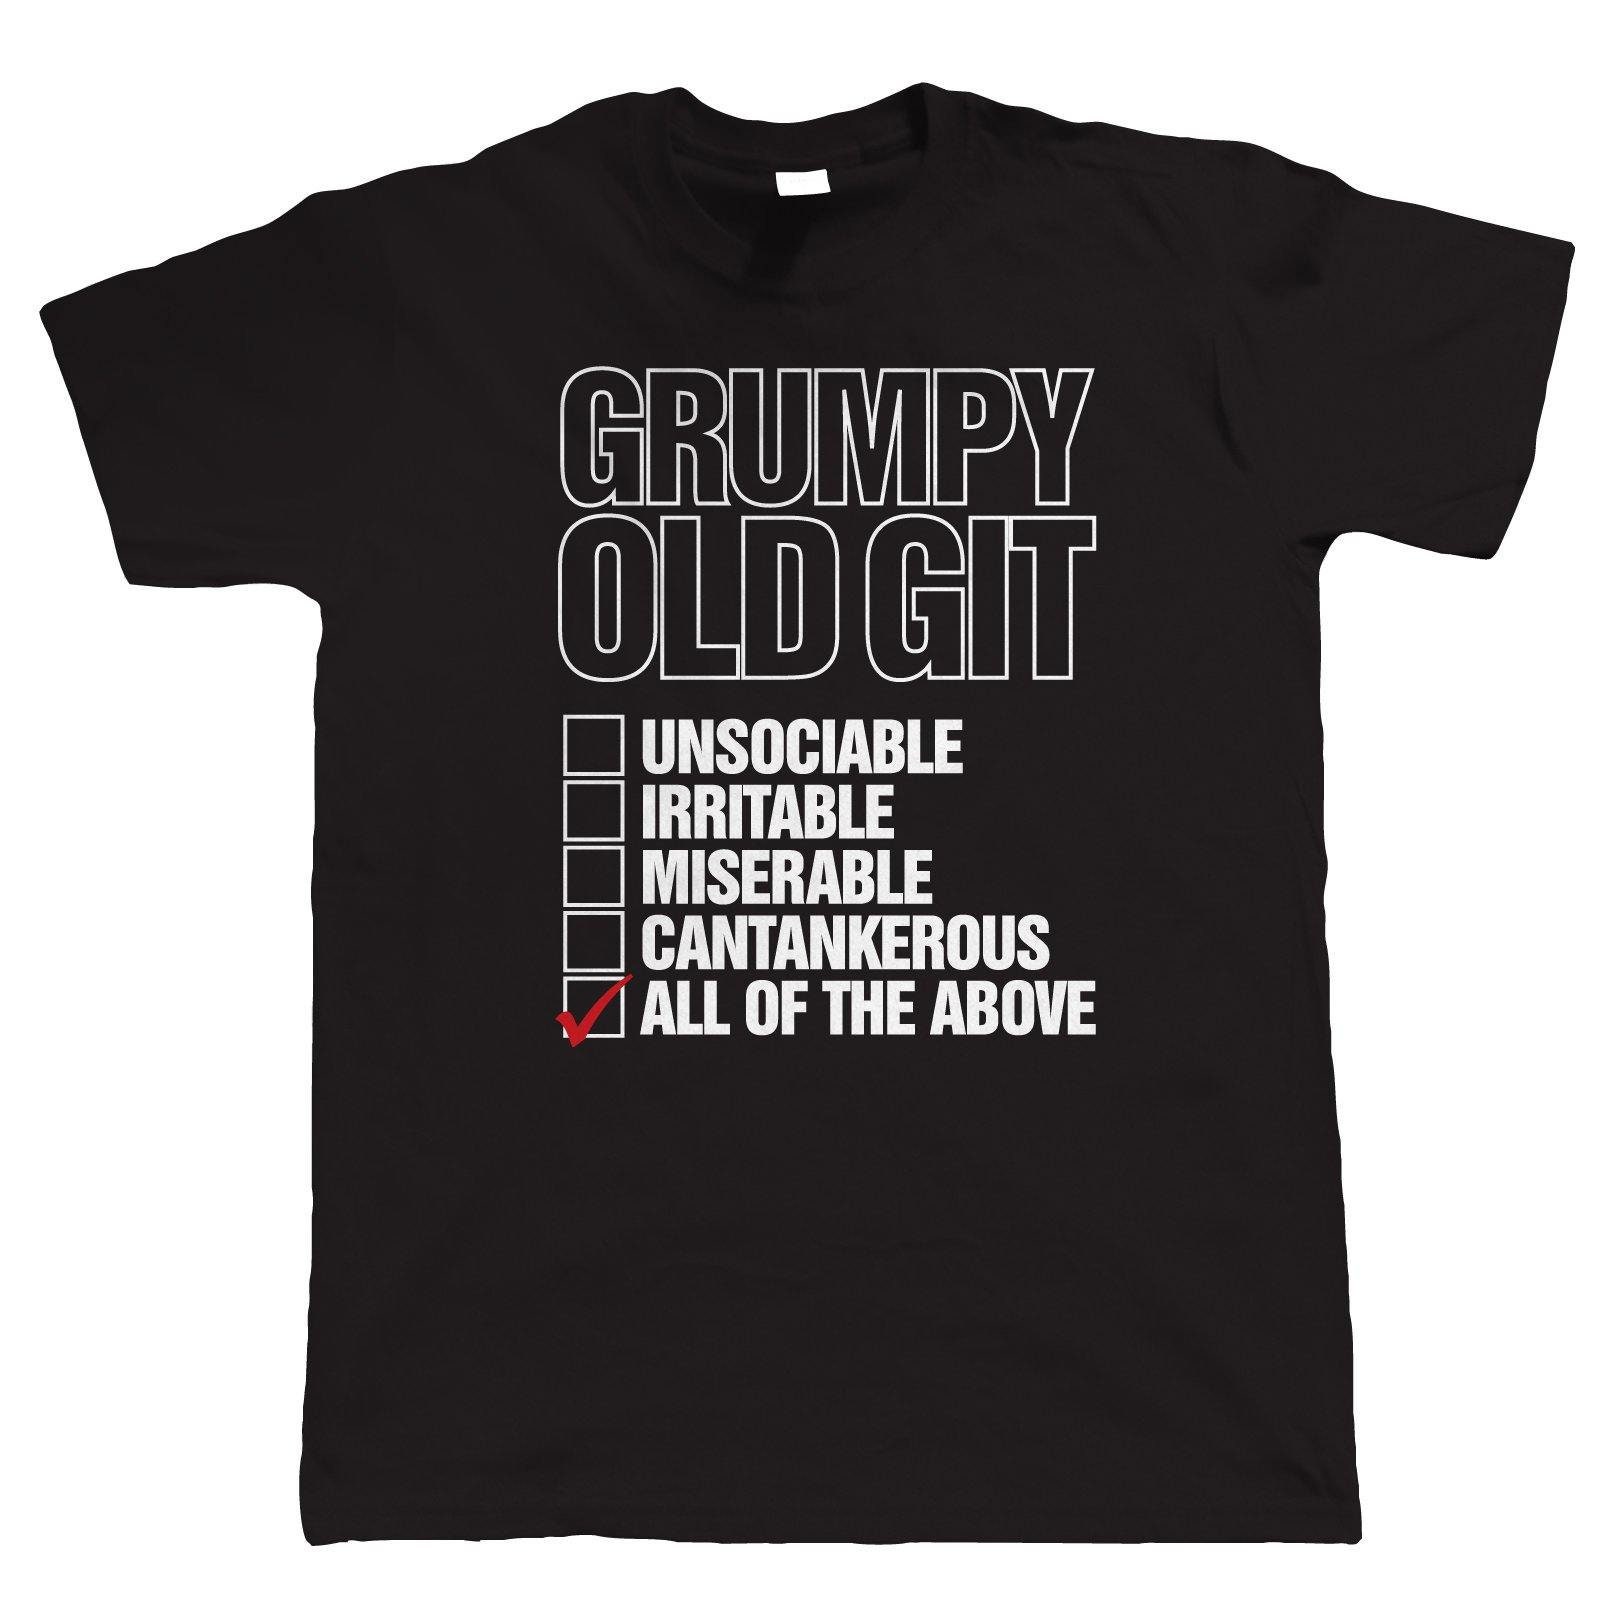 Grumpy Old Git Funny Mens For Halloween T Shirt